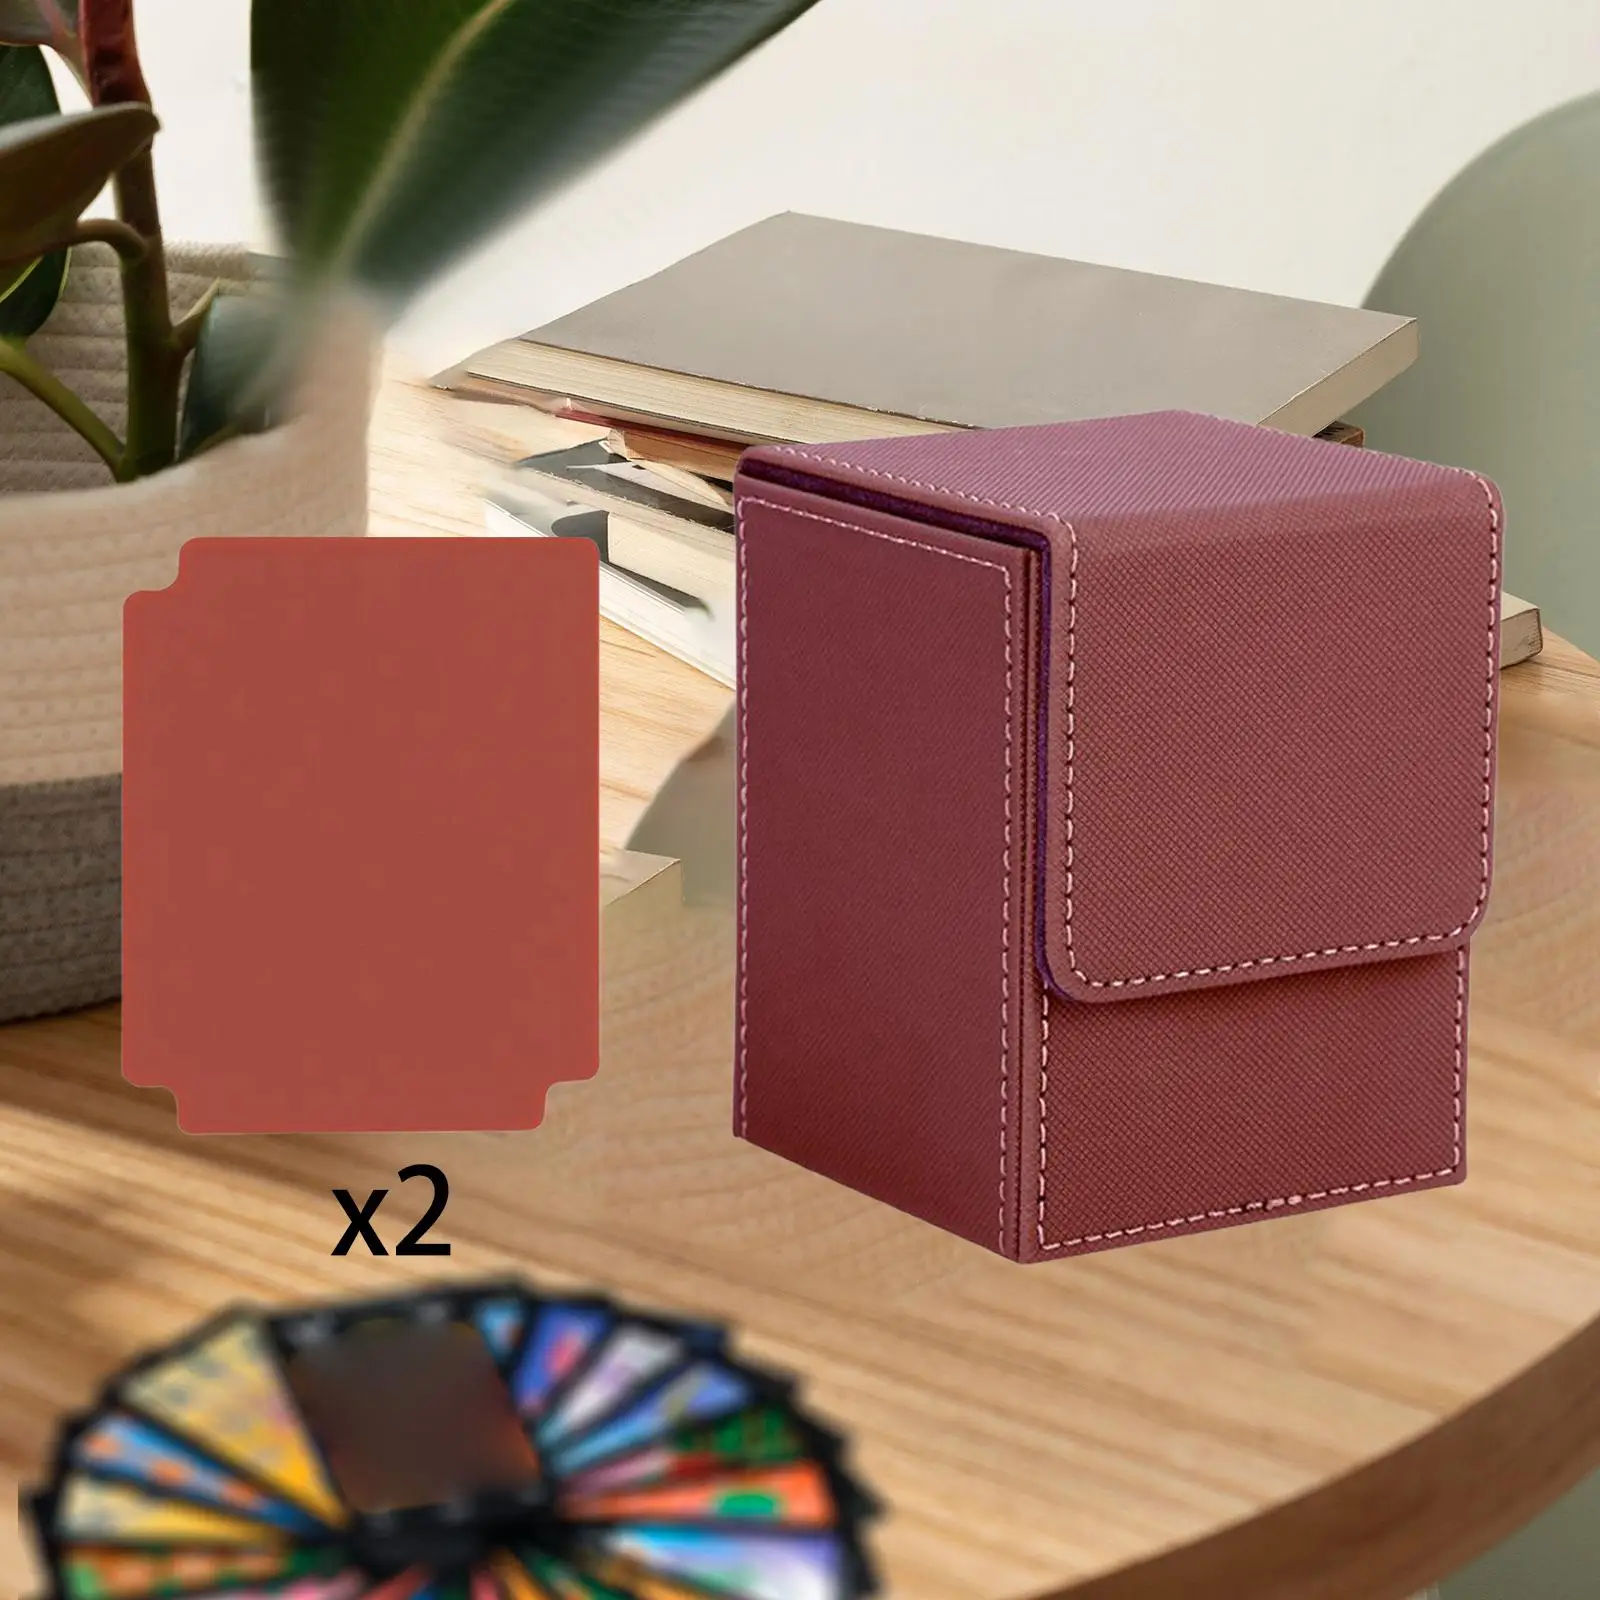 Card Deck Box,Card Organizer,Portable Holder,Large with Dividers PU Leather